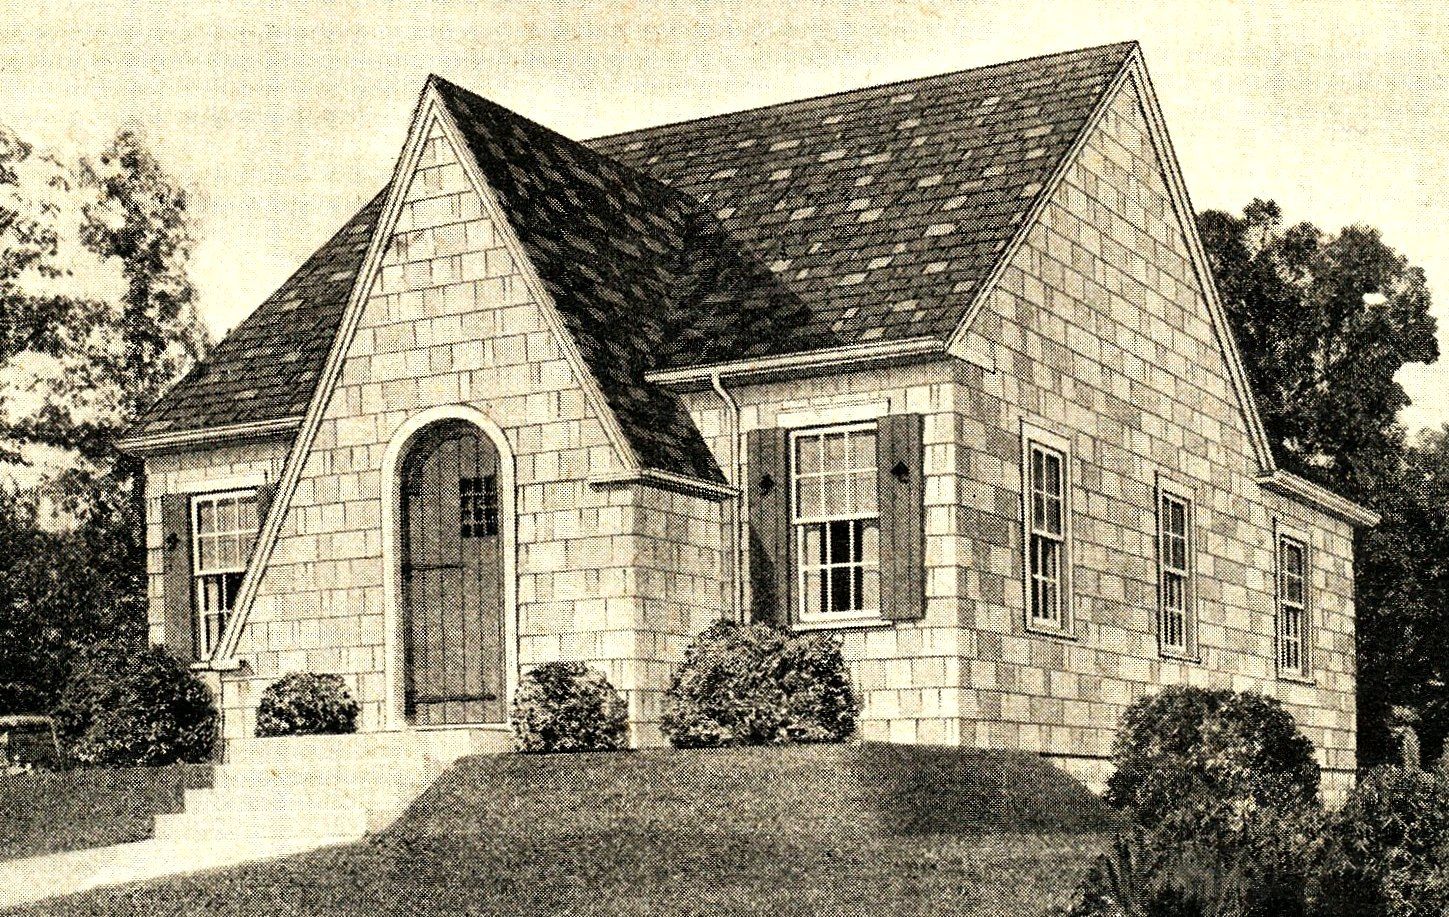 So, the Riverside/Claremont (Rivermont?) was the same house. But it was a very attractive Cape Cod. 